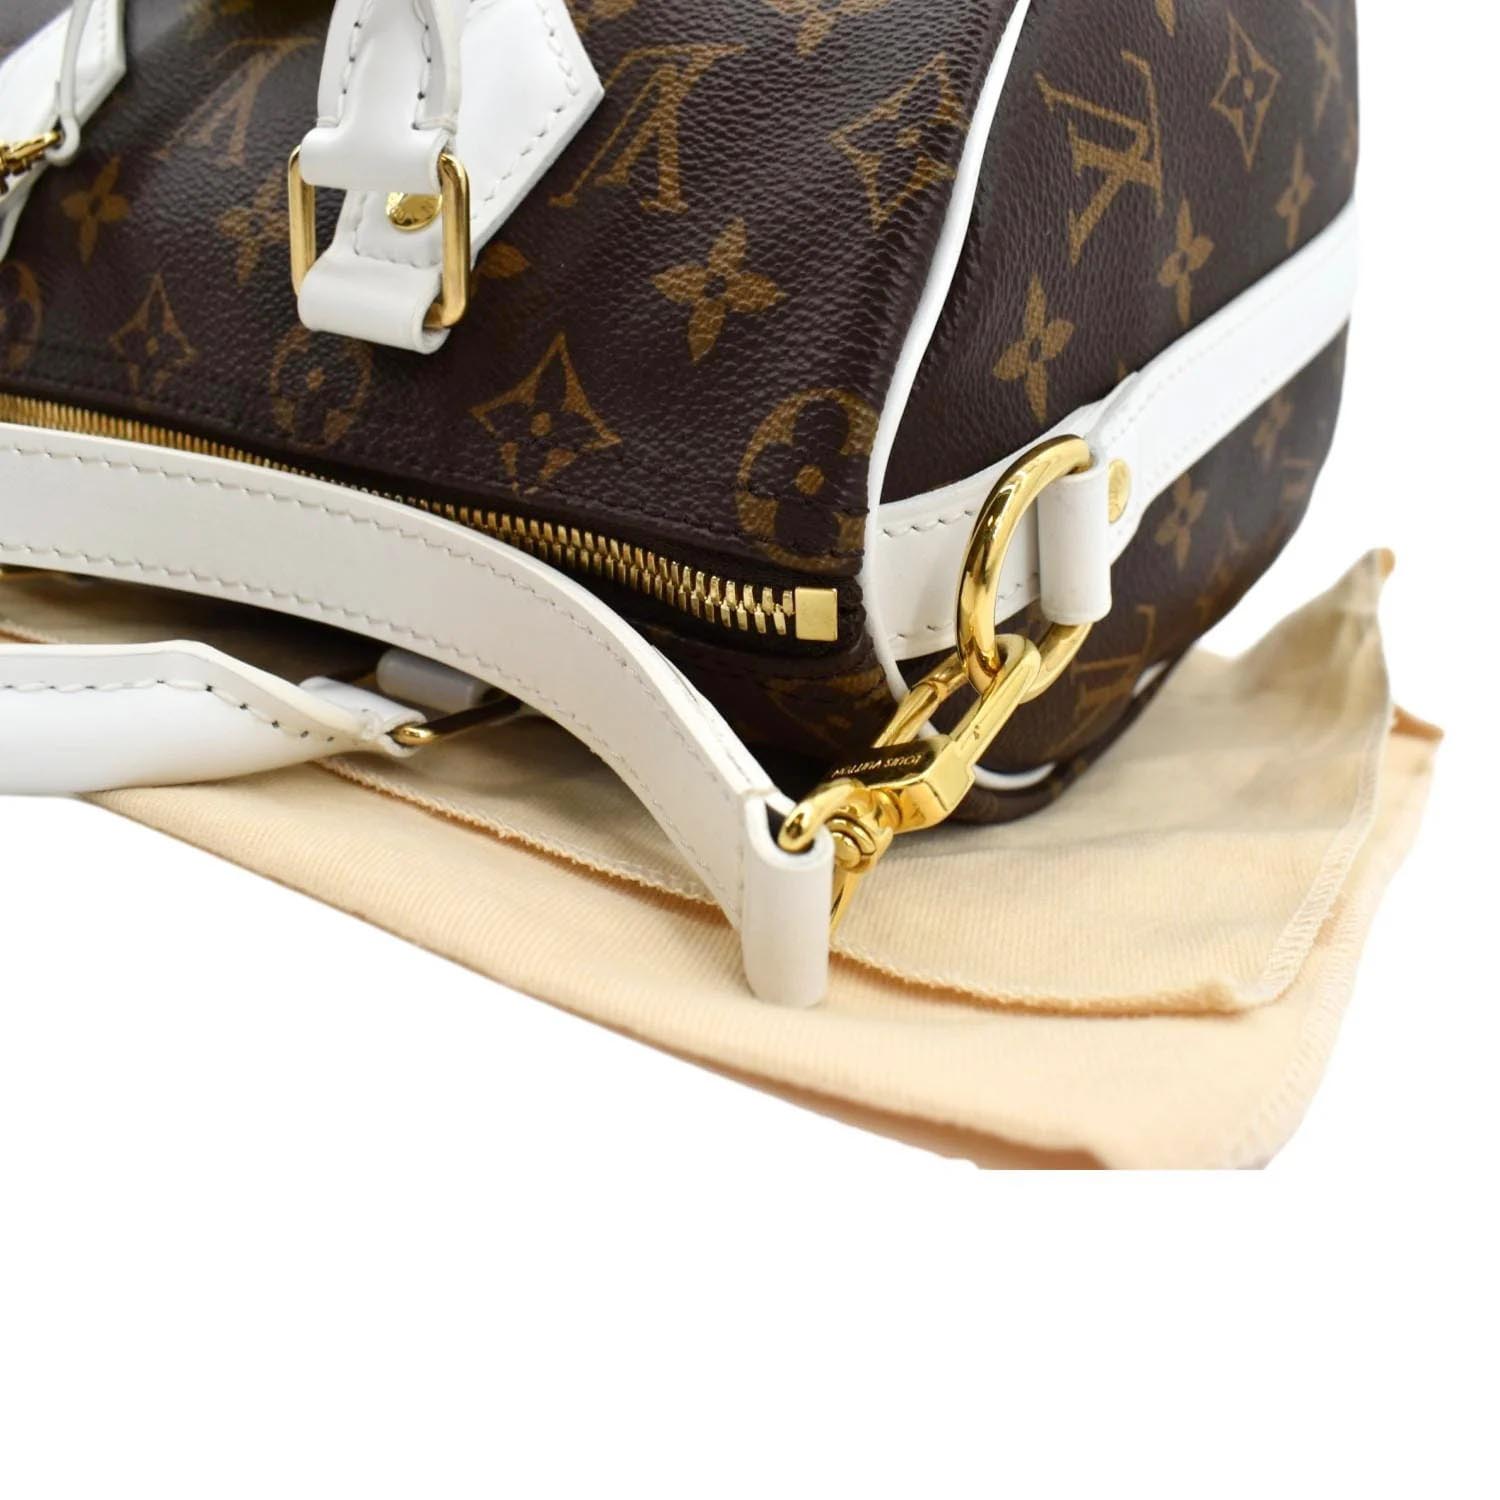 Speedy 25 bandouliere  Women's bags by style, Louis vuitton